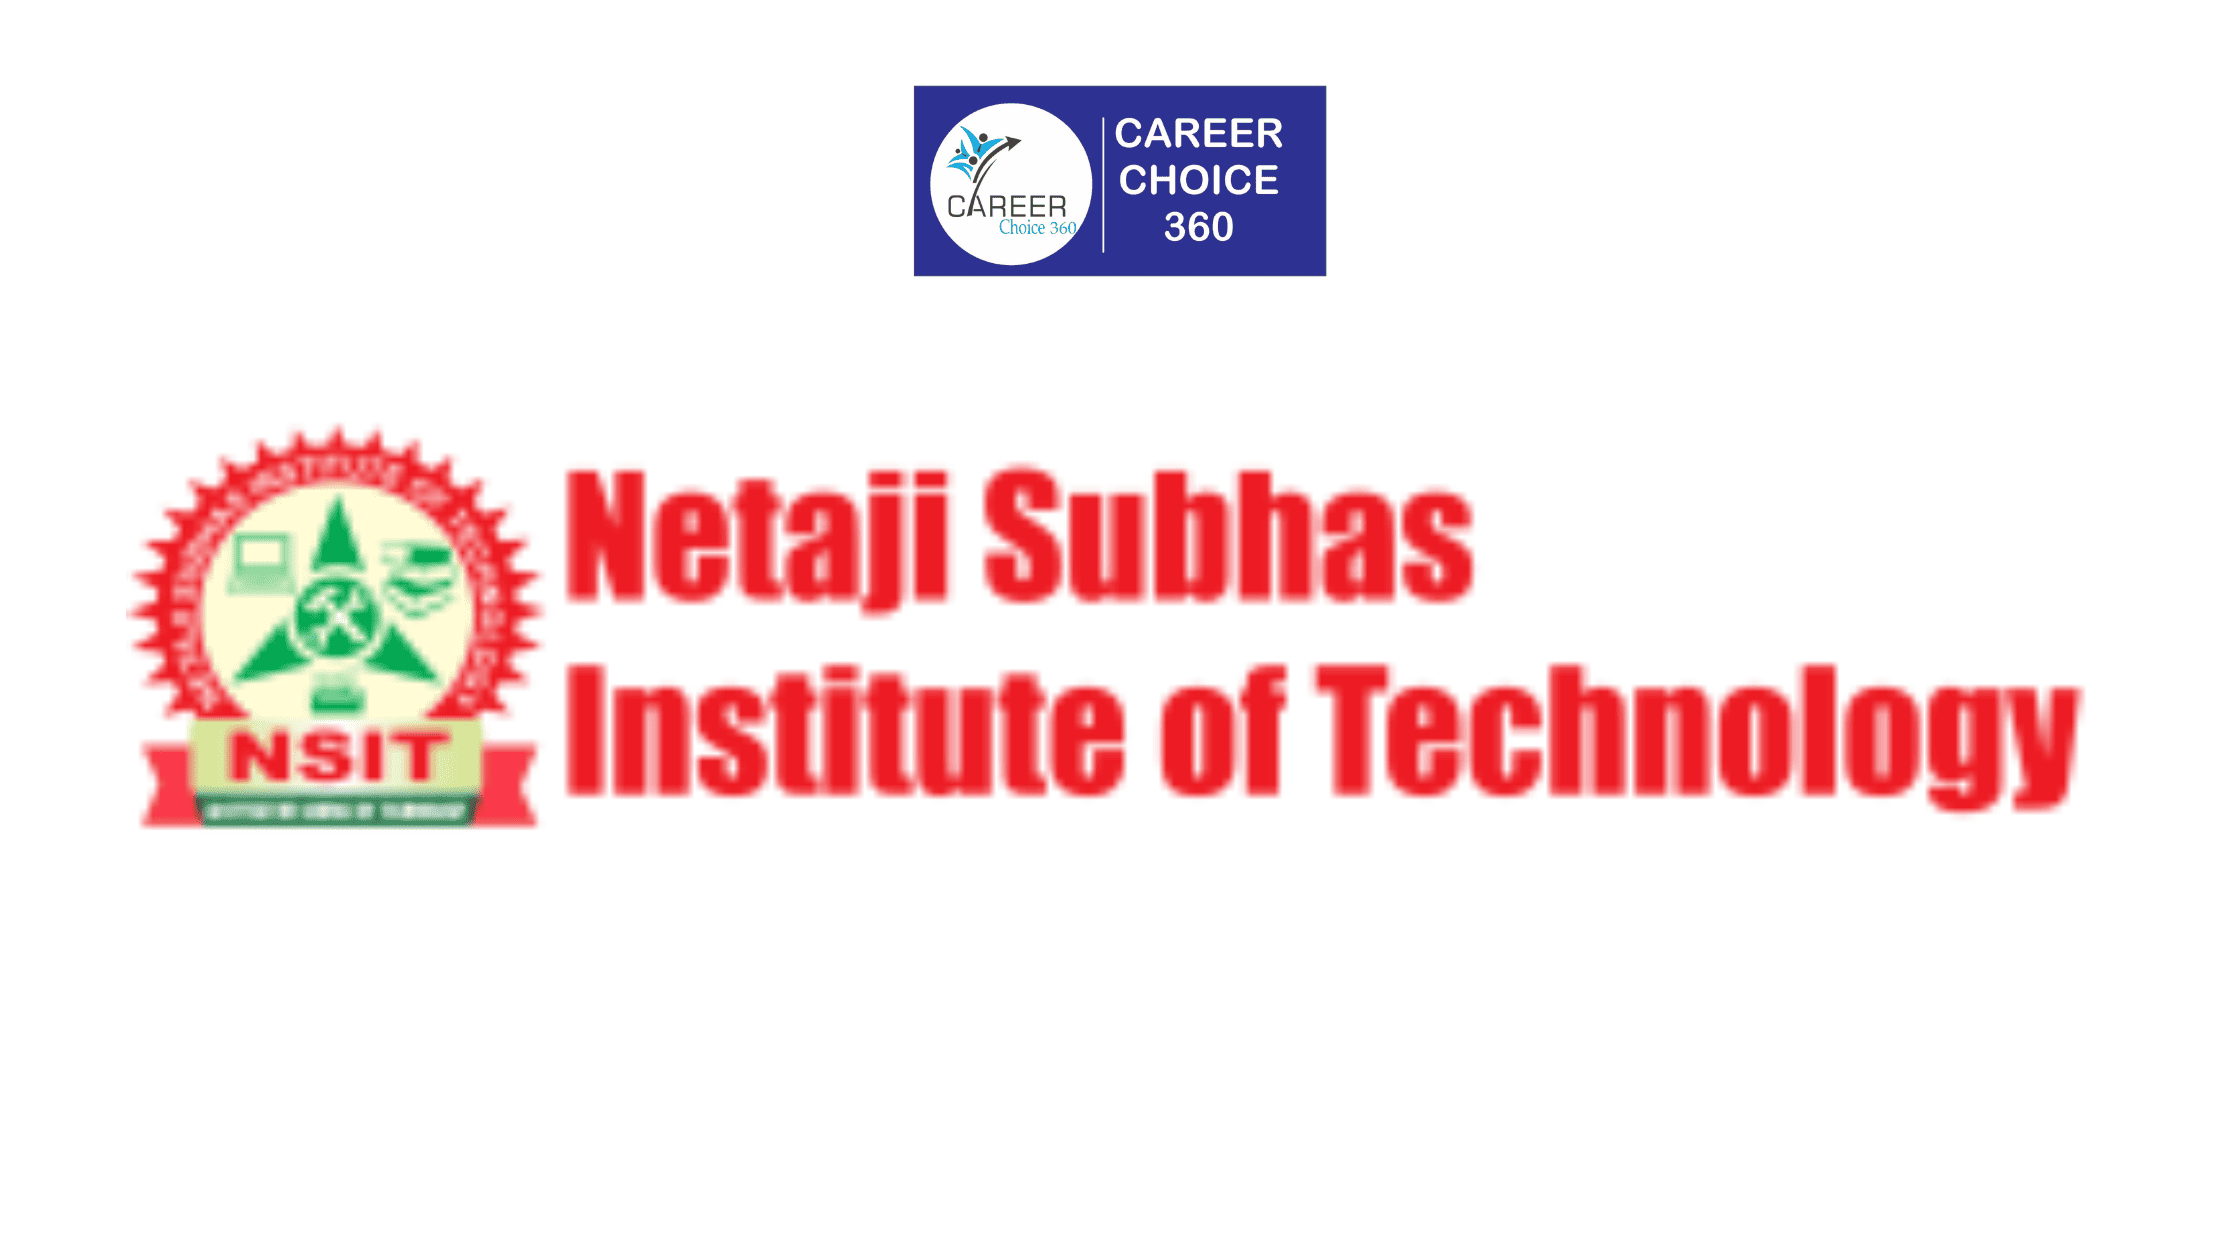 You are currently viewing Netaji Subhas Institute of Technology (NSIT) : Courses and Eligibility Criteria, Admission Procedure, Placement, Scholarship